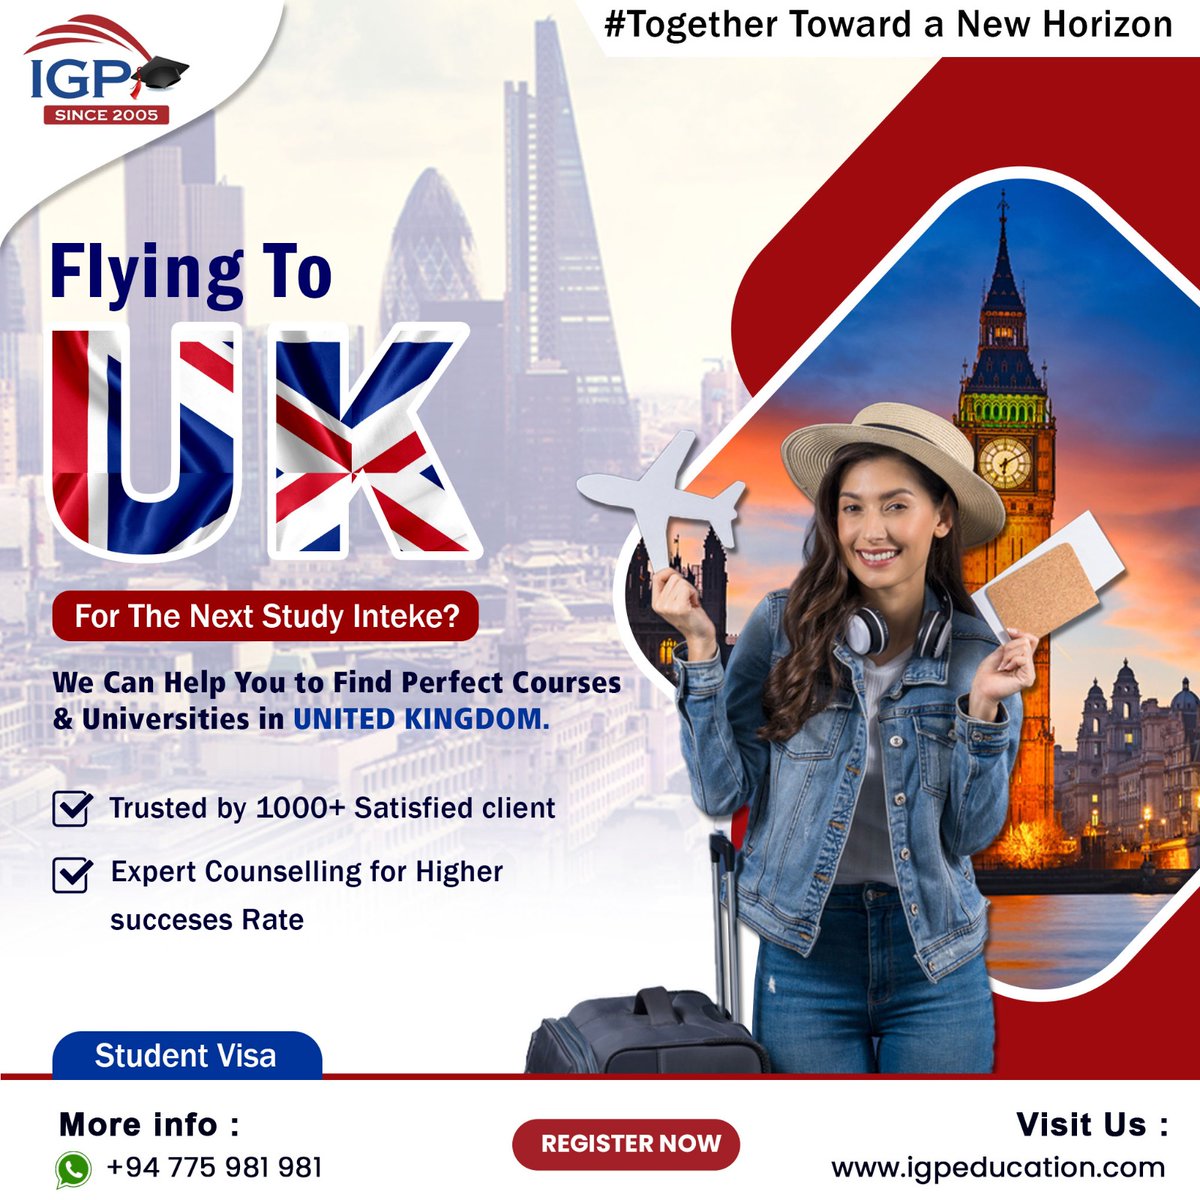 If you're planning to study in the UK
Contact Us:
📲 +94 775 981 981
🌐 igpeducation.com/uk/
𝐒𝐭𝐮𝐝𝐲 𝐚𝐫𝐨𝐮𝐧𝐝 𝐭𝐡𝐞 𝐰𝐨𝐫𝐥𝐝 𝐰𝐢𝐭𝐡 𝐈𝐆𝐏 𝐄𝐝𝐮𝐜𝐚𝐭𝐢𝐨𝐧.

#internationaleducation #studyabroad